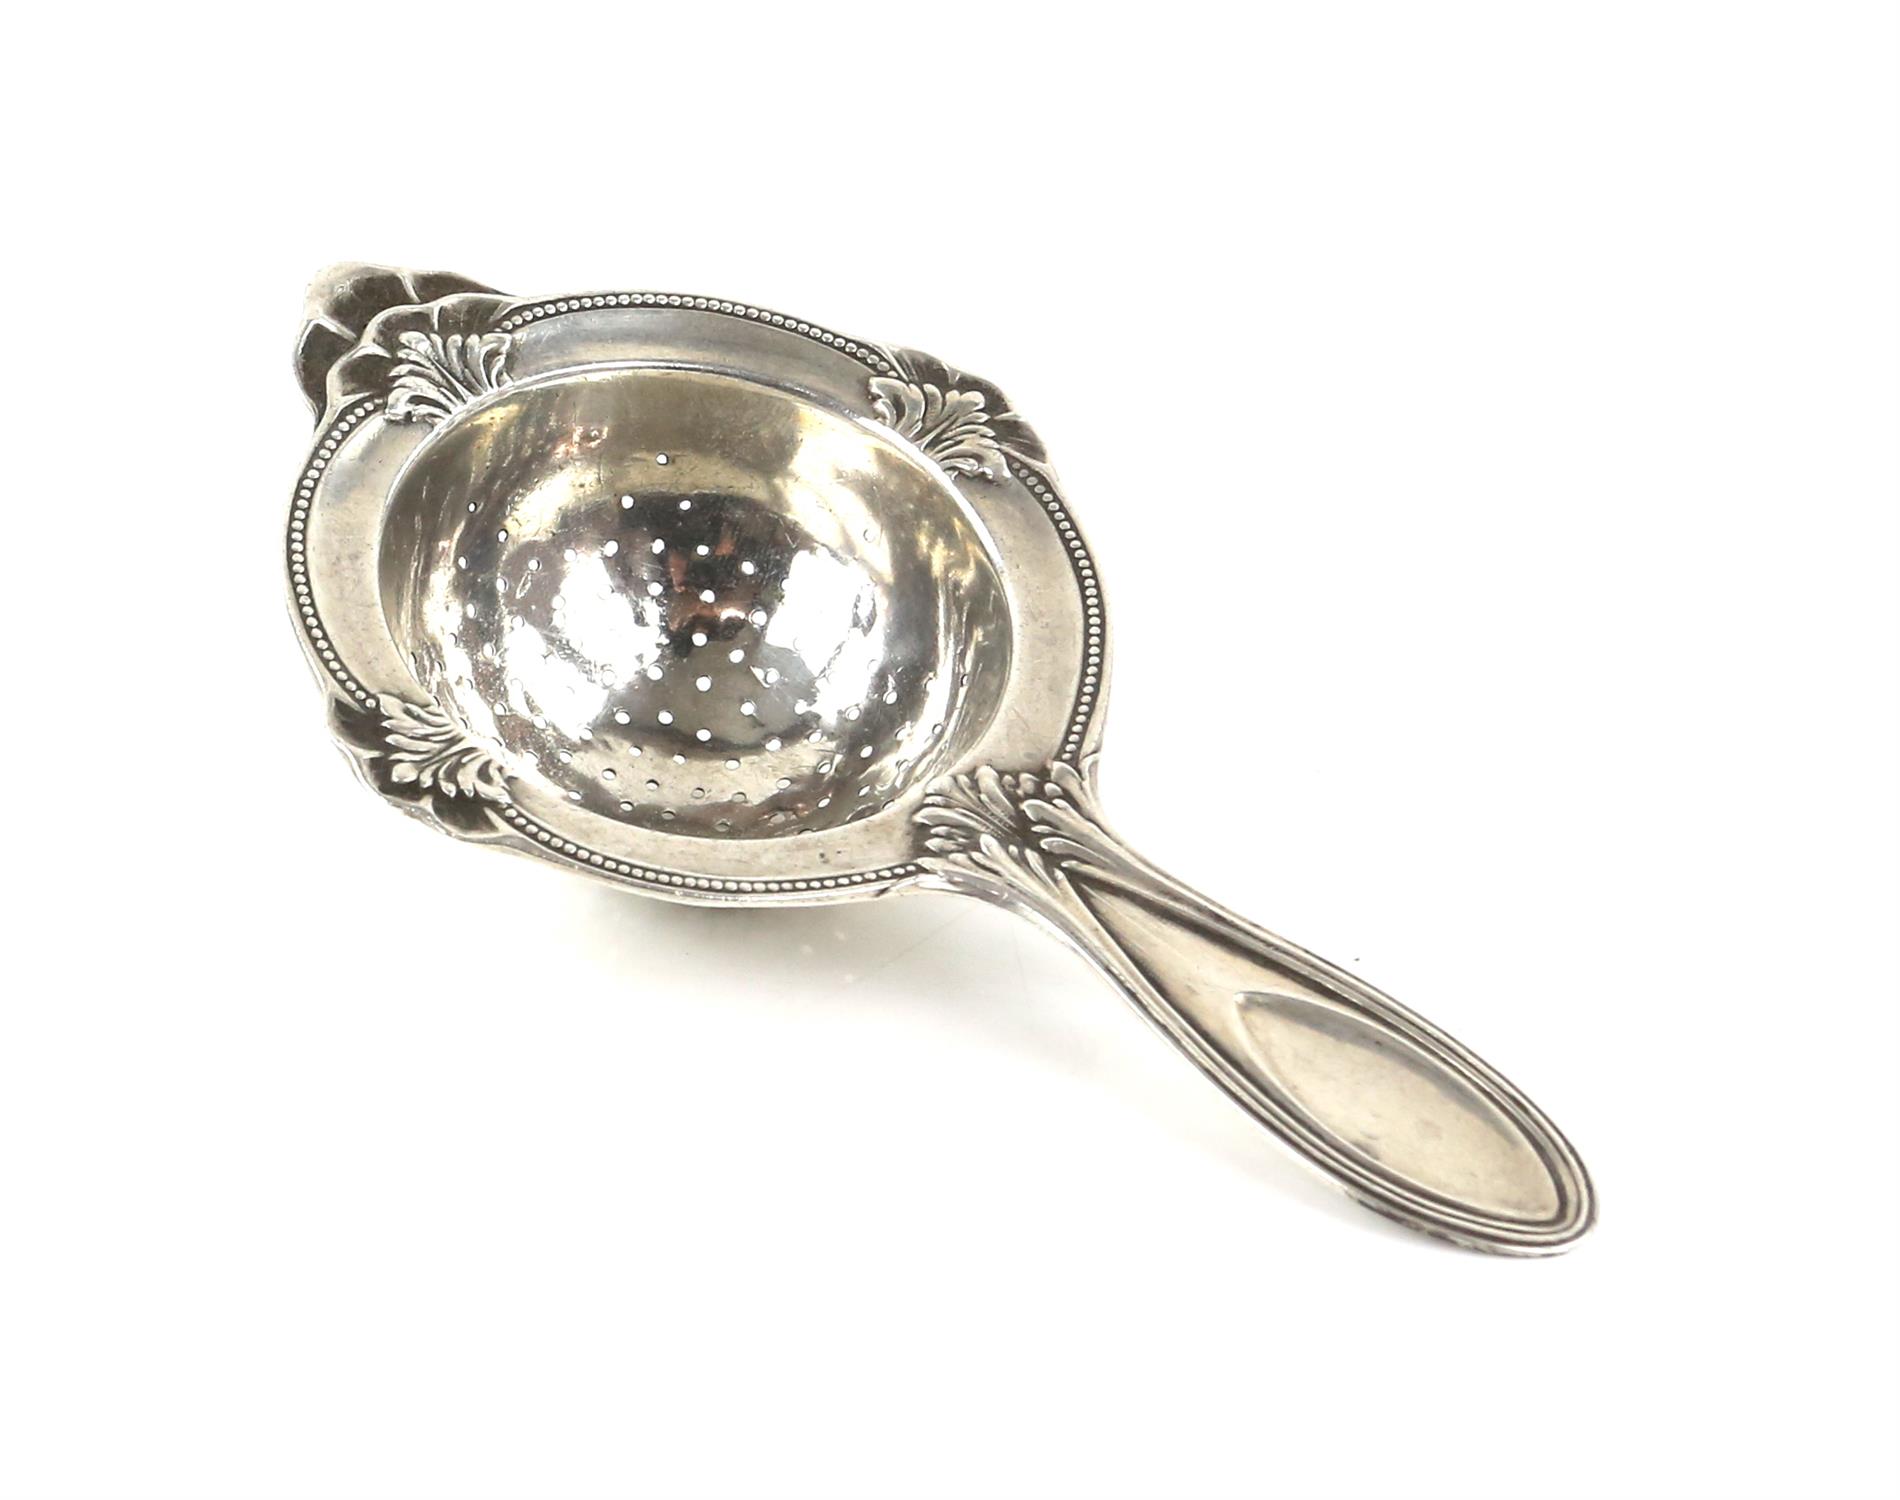 Continental silver caddy spoon and an 830 grade silver tea strainer - Image 2 of 4